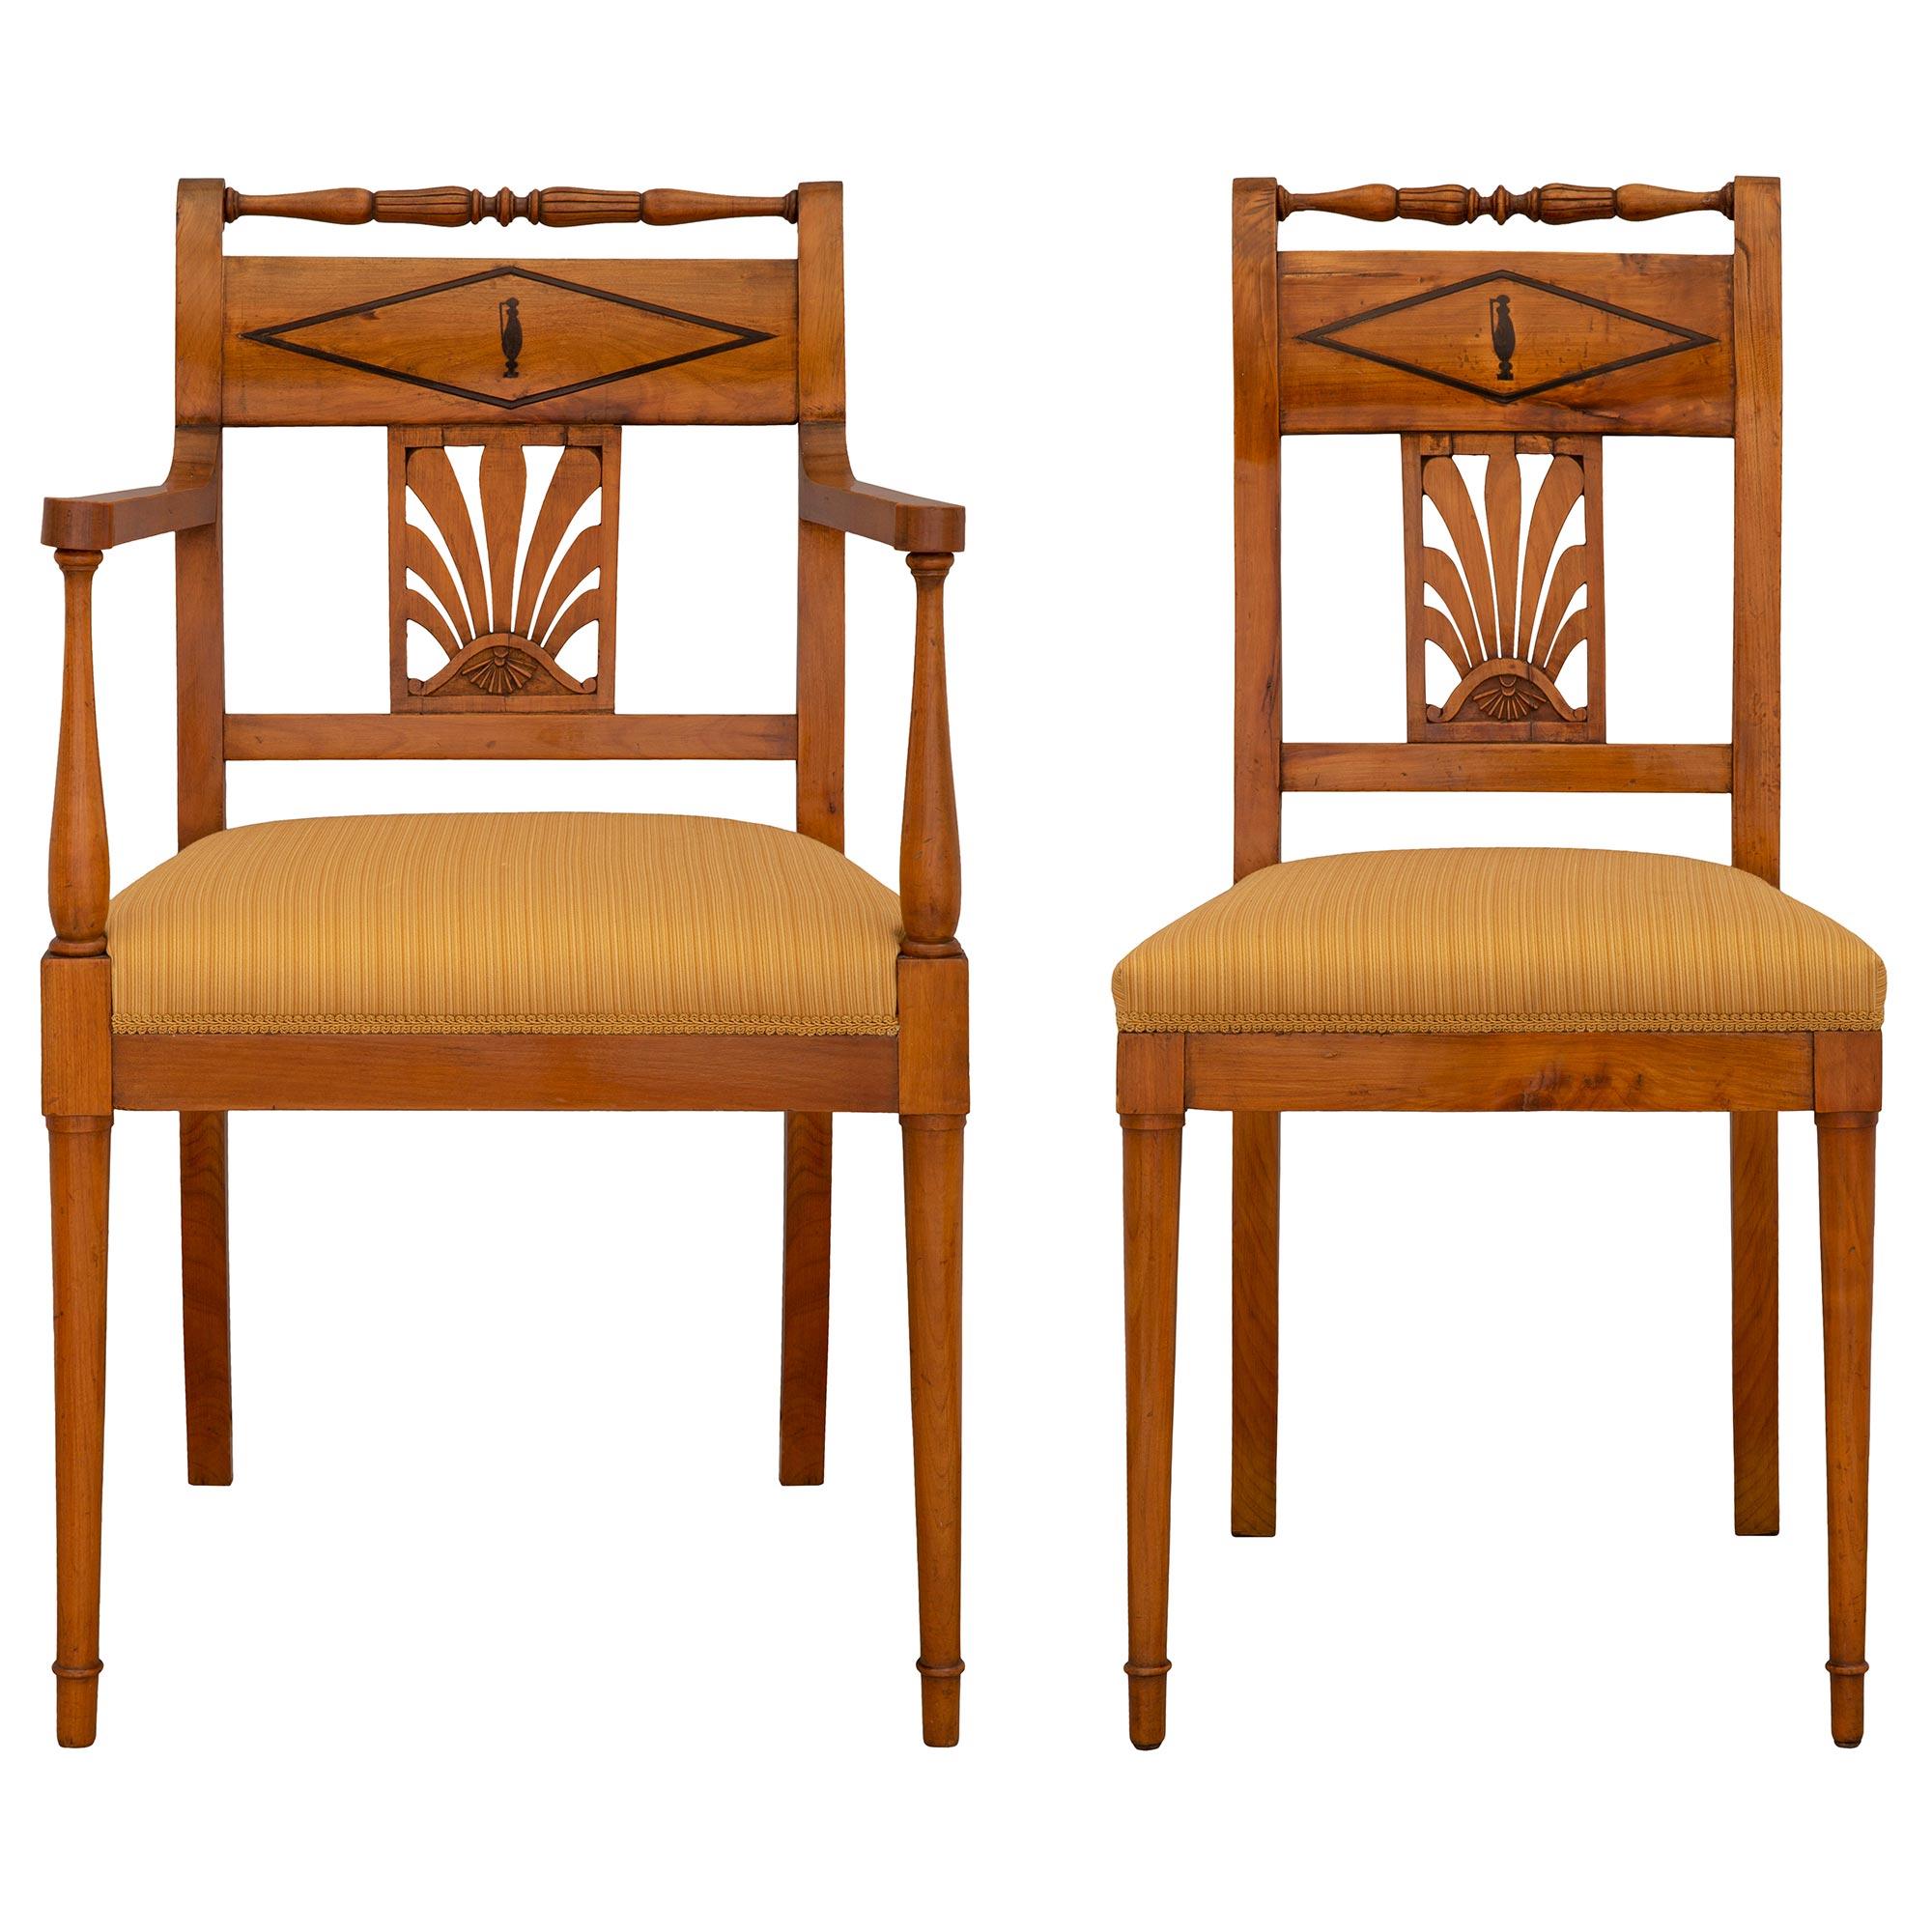 An elegant set of eight Continental 19th century Biedermeier st. Cherrywood and ebonized Fruitwood dining chairs. The set consists of two arm chairs and six side chairs each raised by two beautiful circular tapered legs with fine topie shaped feet